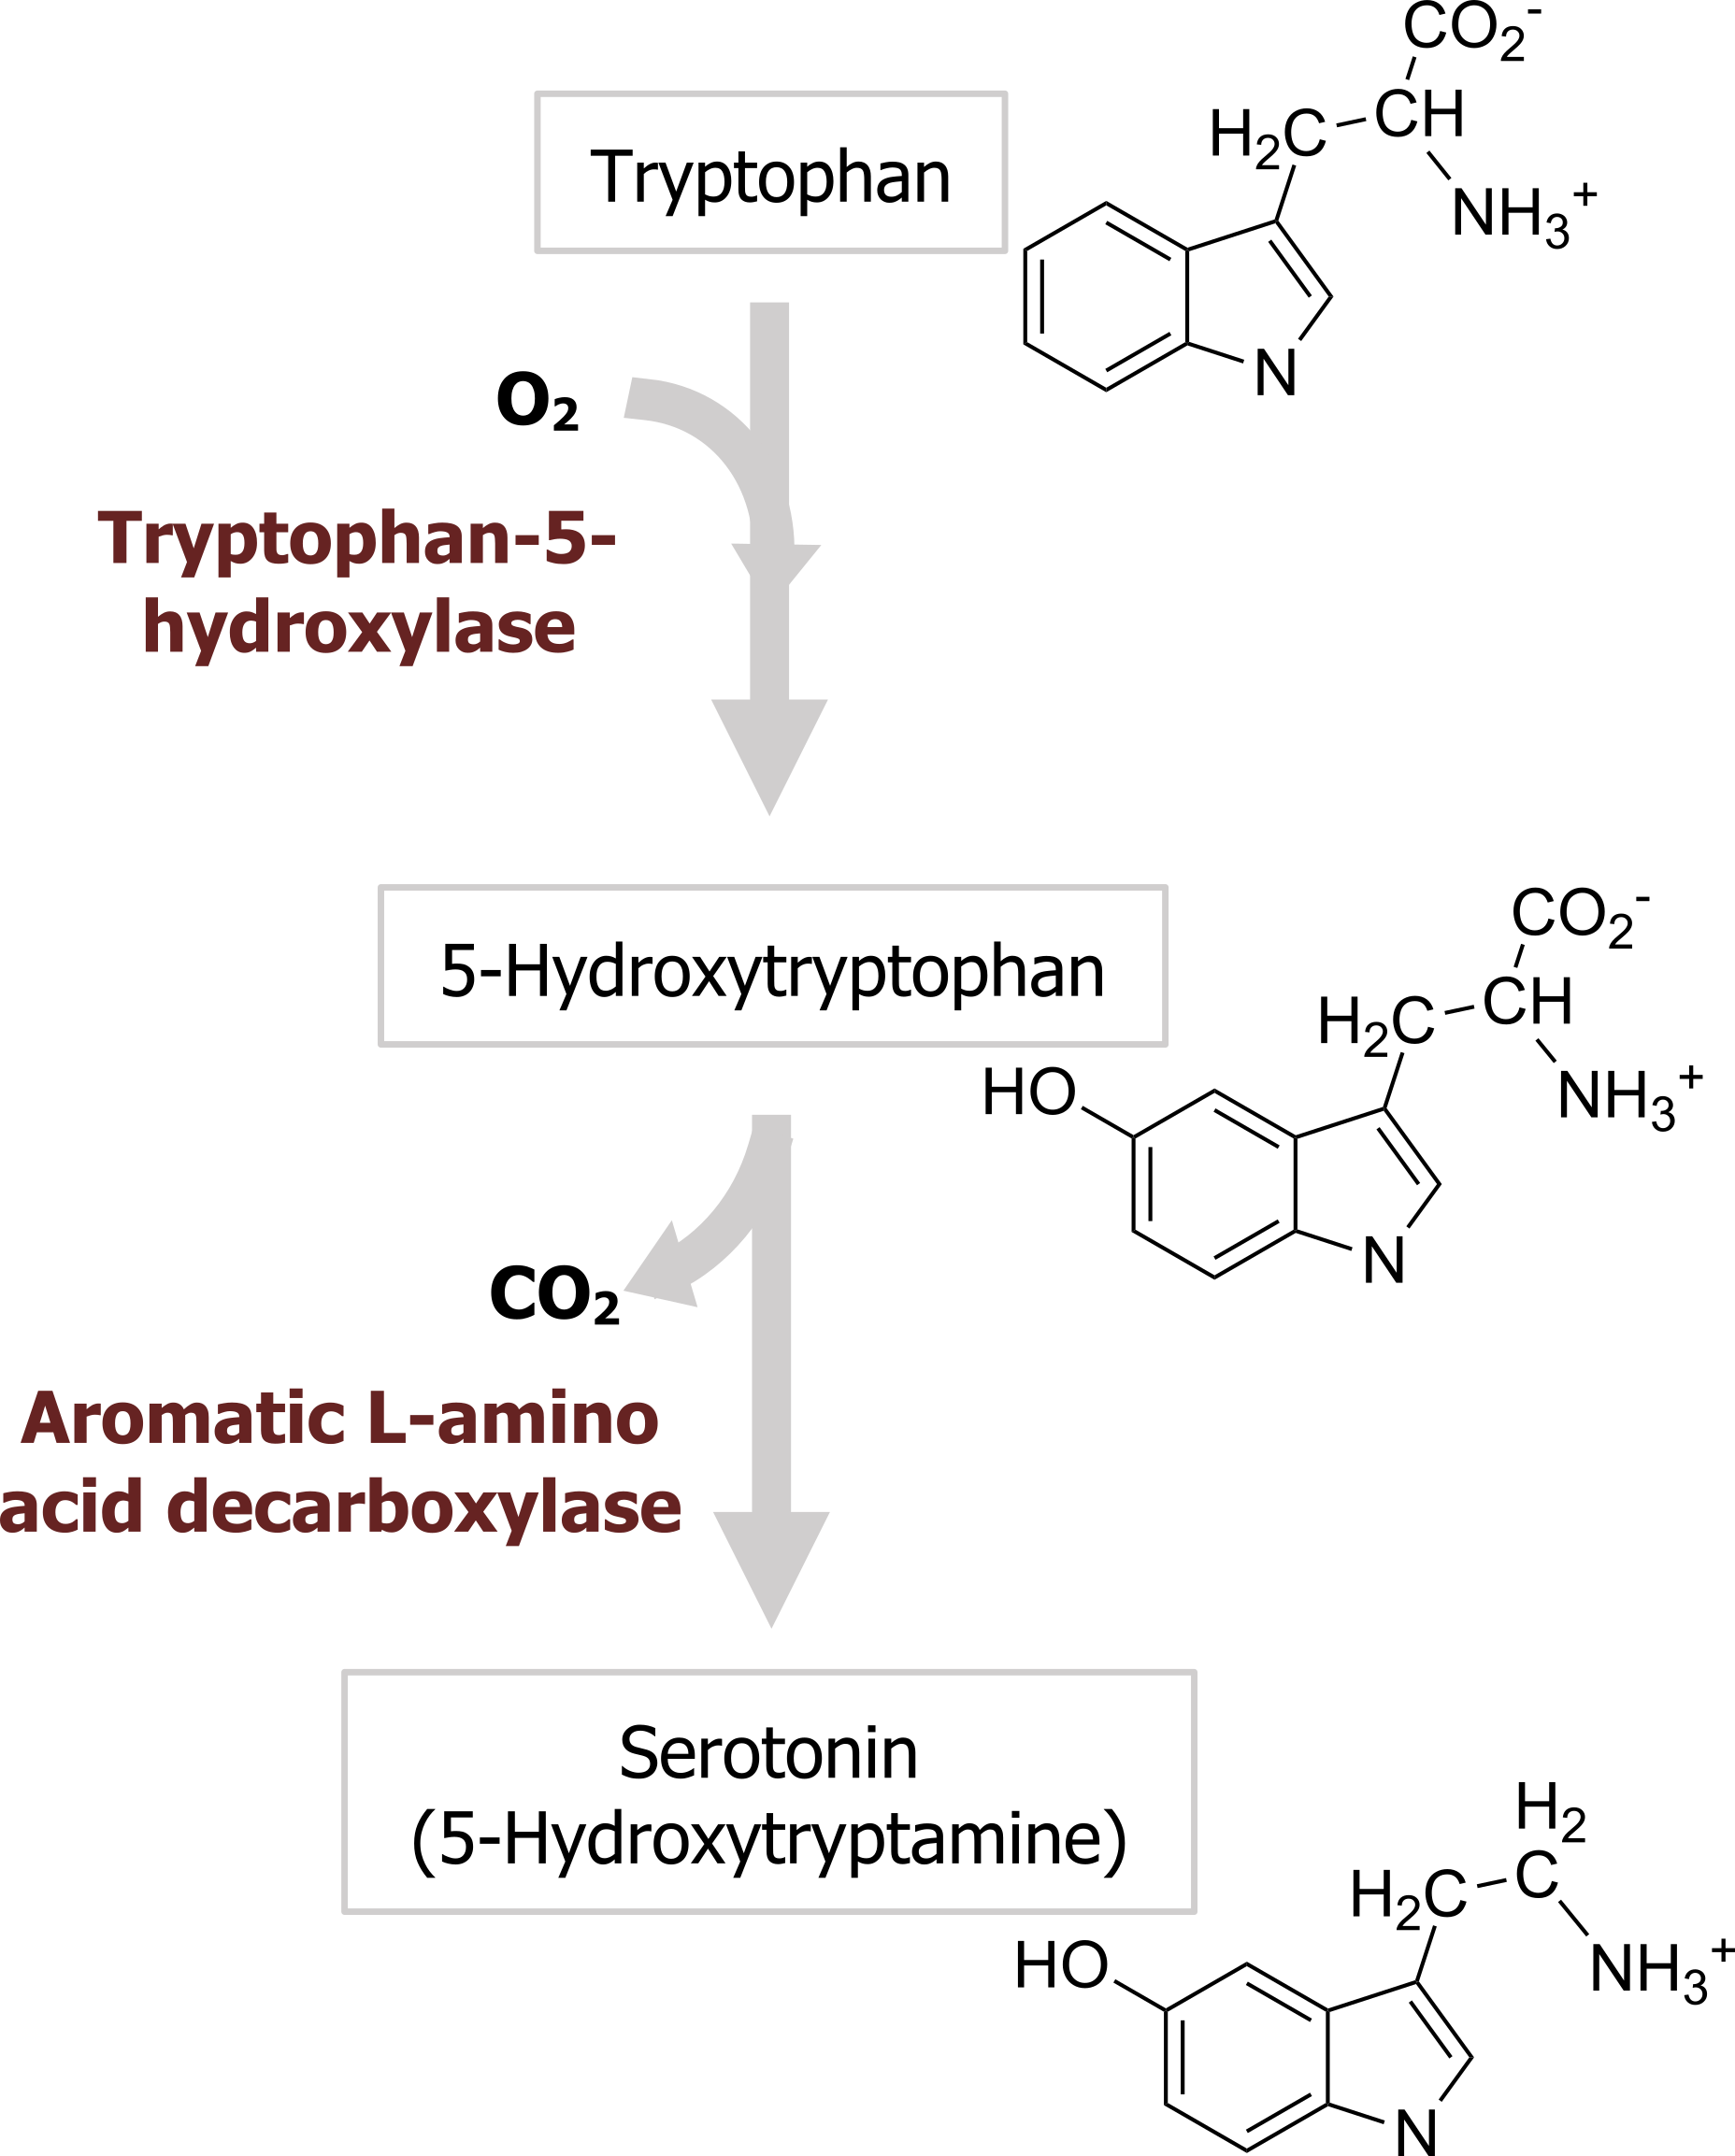 Tryptophan arrow with enzyme tryptophan-5-hydroxylase with O2 addition to 5-hydroxytryptophan arrow with enzyme aromatic L-amino acid decarboxylase with loss of CO2 to serotonin (5-hydroxytryptamine)